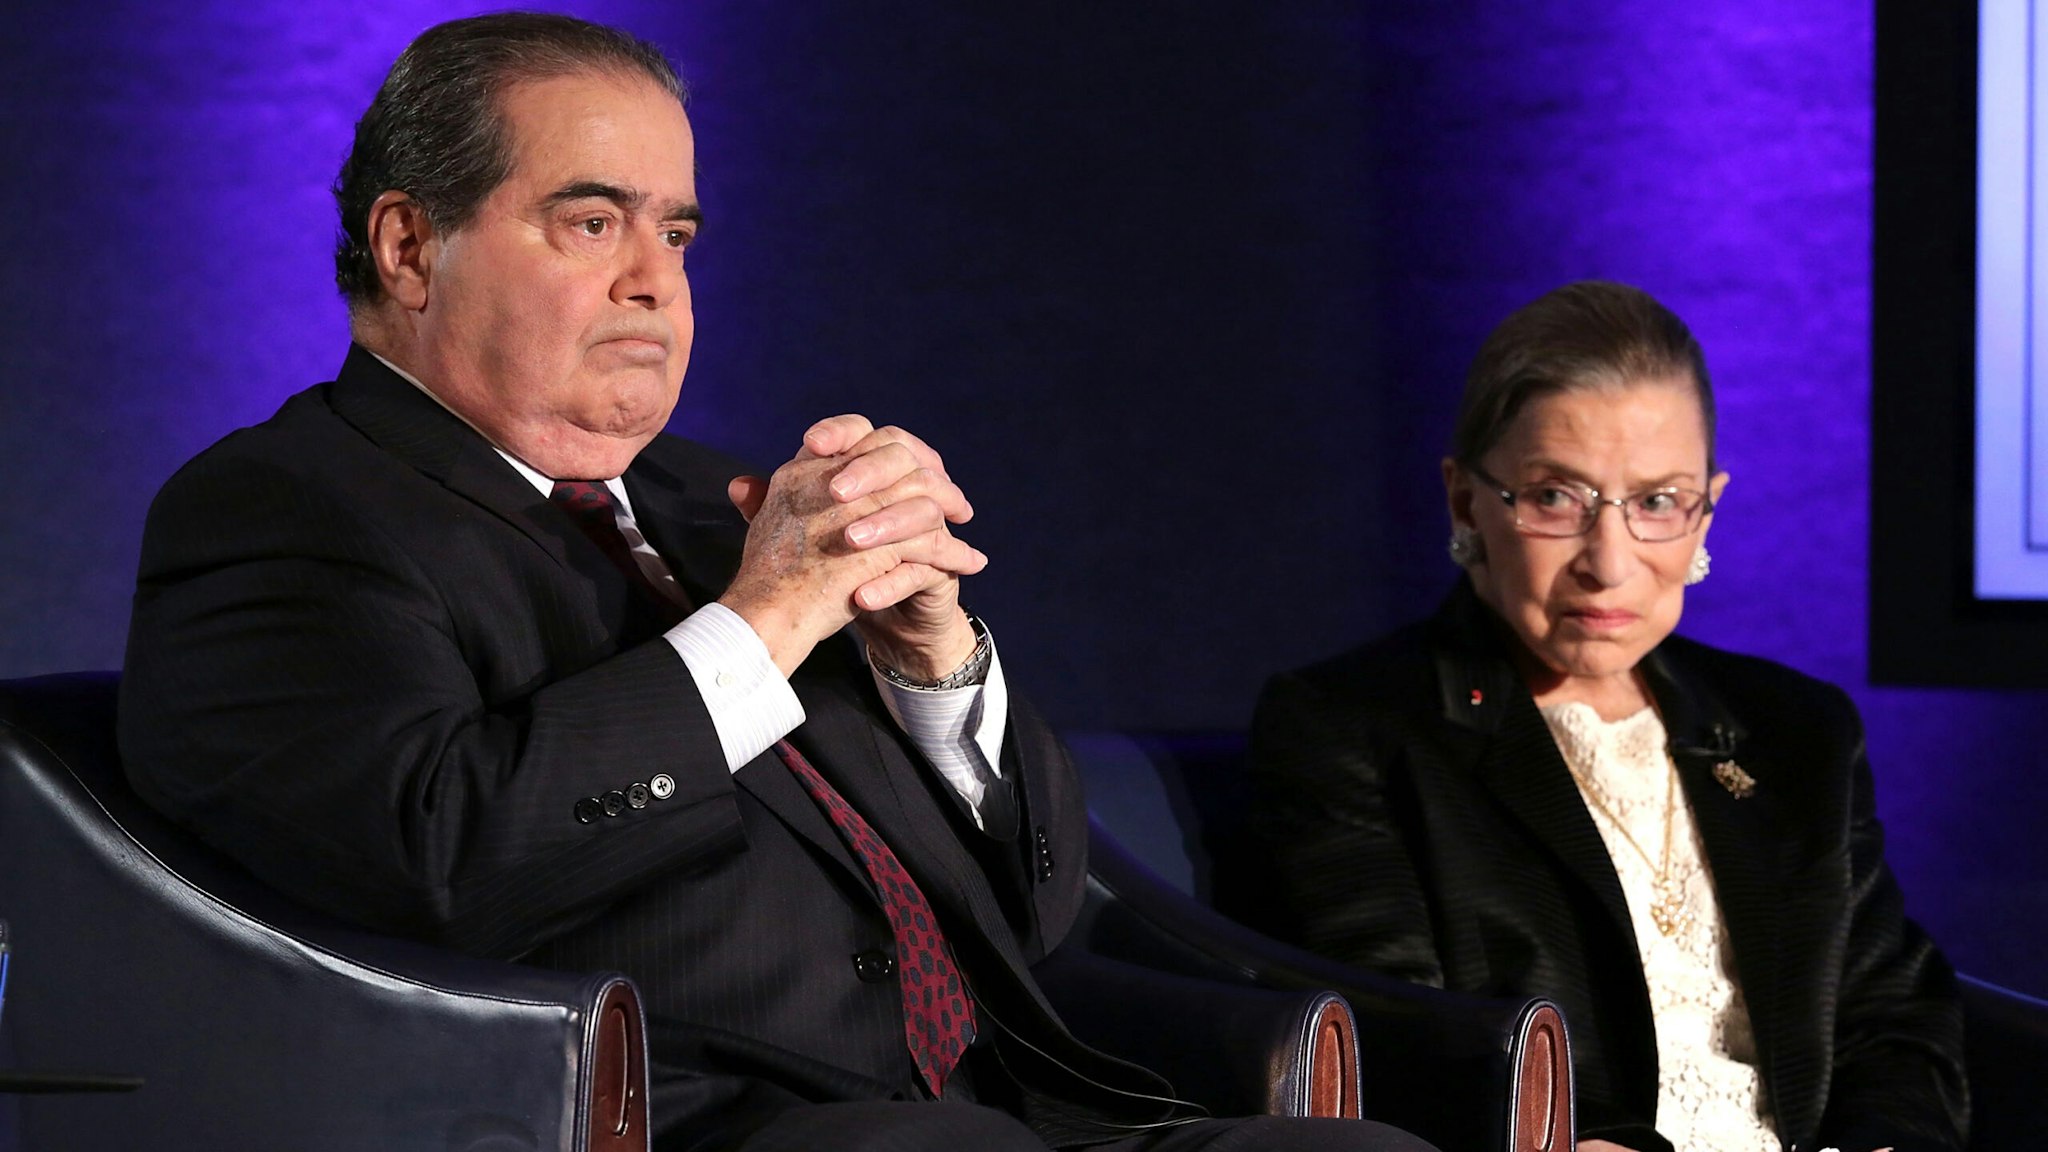 WASHINGTON, DC - APRIL 17: Supreme Court Justices Antonin Scalia (L) and Ruth Bader Ginsburg (R) wait for the beginning of the taping of "The Kalb Report" April 17, 2014 at the National Press Club in Washington, DC. The Kalb Report is a discussion of media ethics and responsibility at the National Press Club held each month.